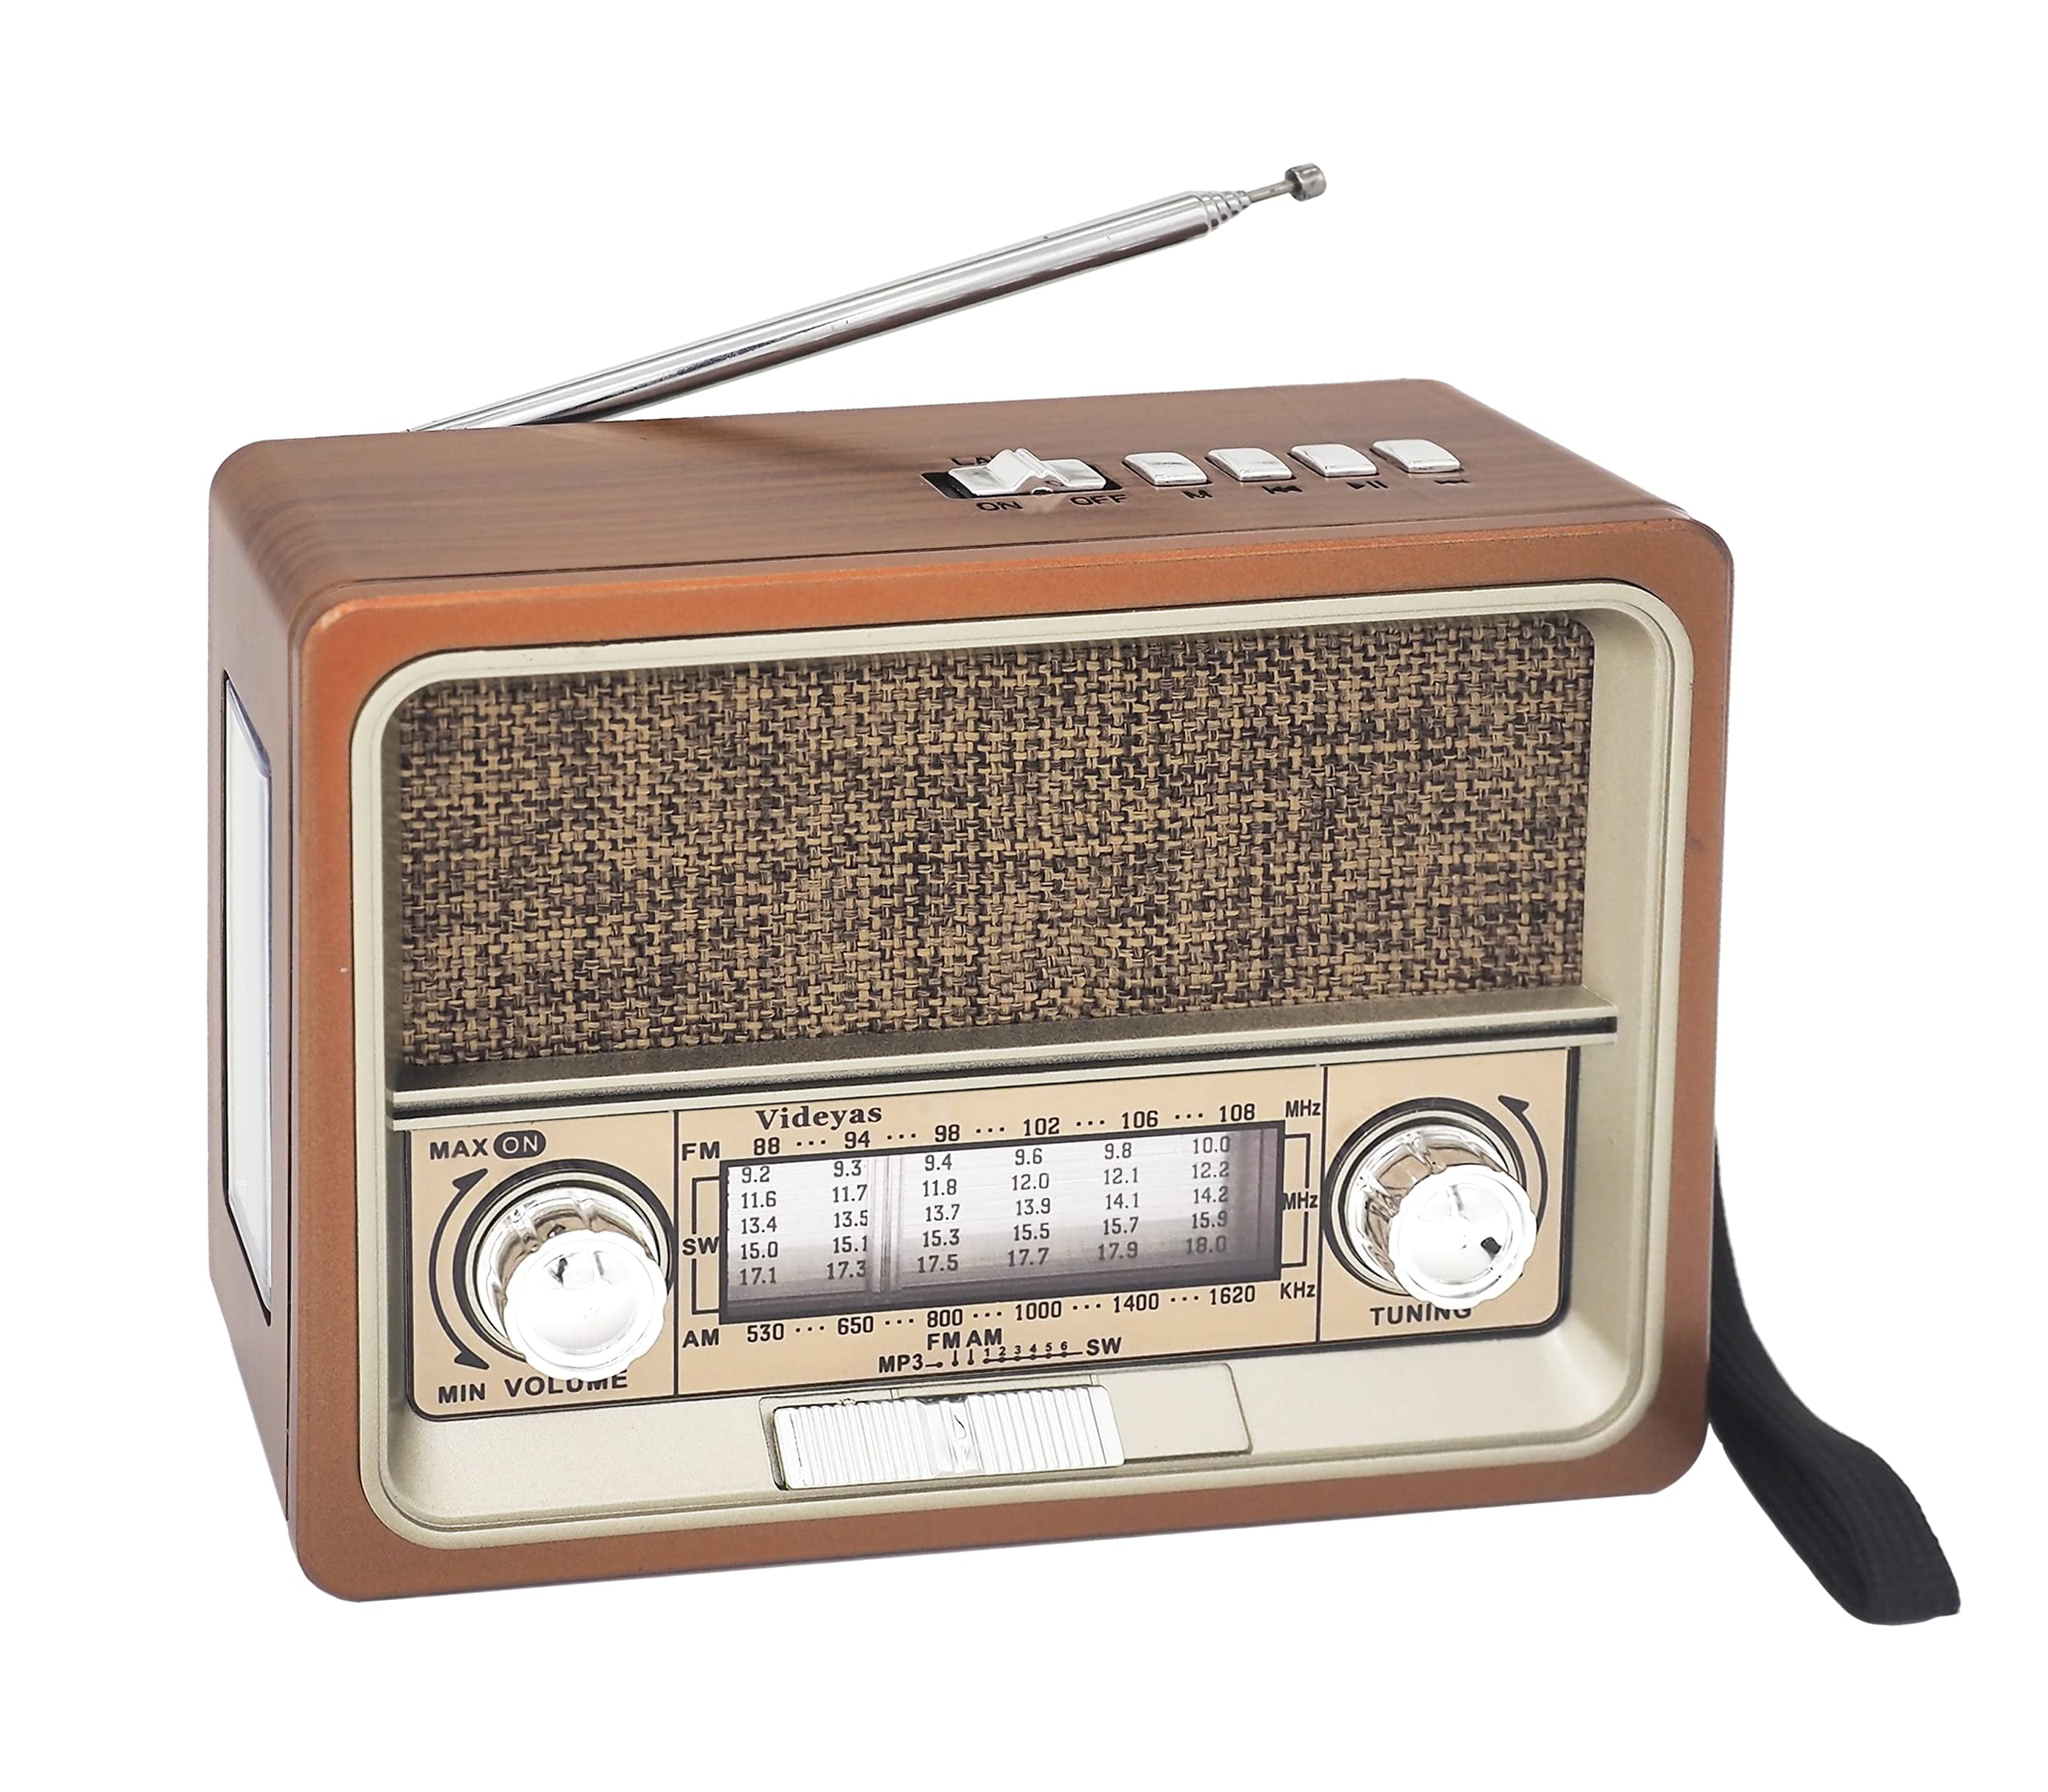 Retro Portable Radio AM FM Shortwave Radio Built-in Battery-Powered Vintage  Radio with Bluetooth Speaker, AUX TF Card USB Disk MP3 Player, Suitable